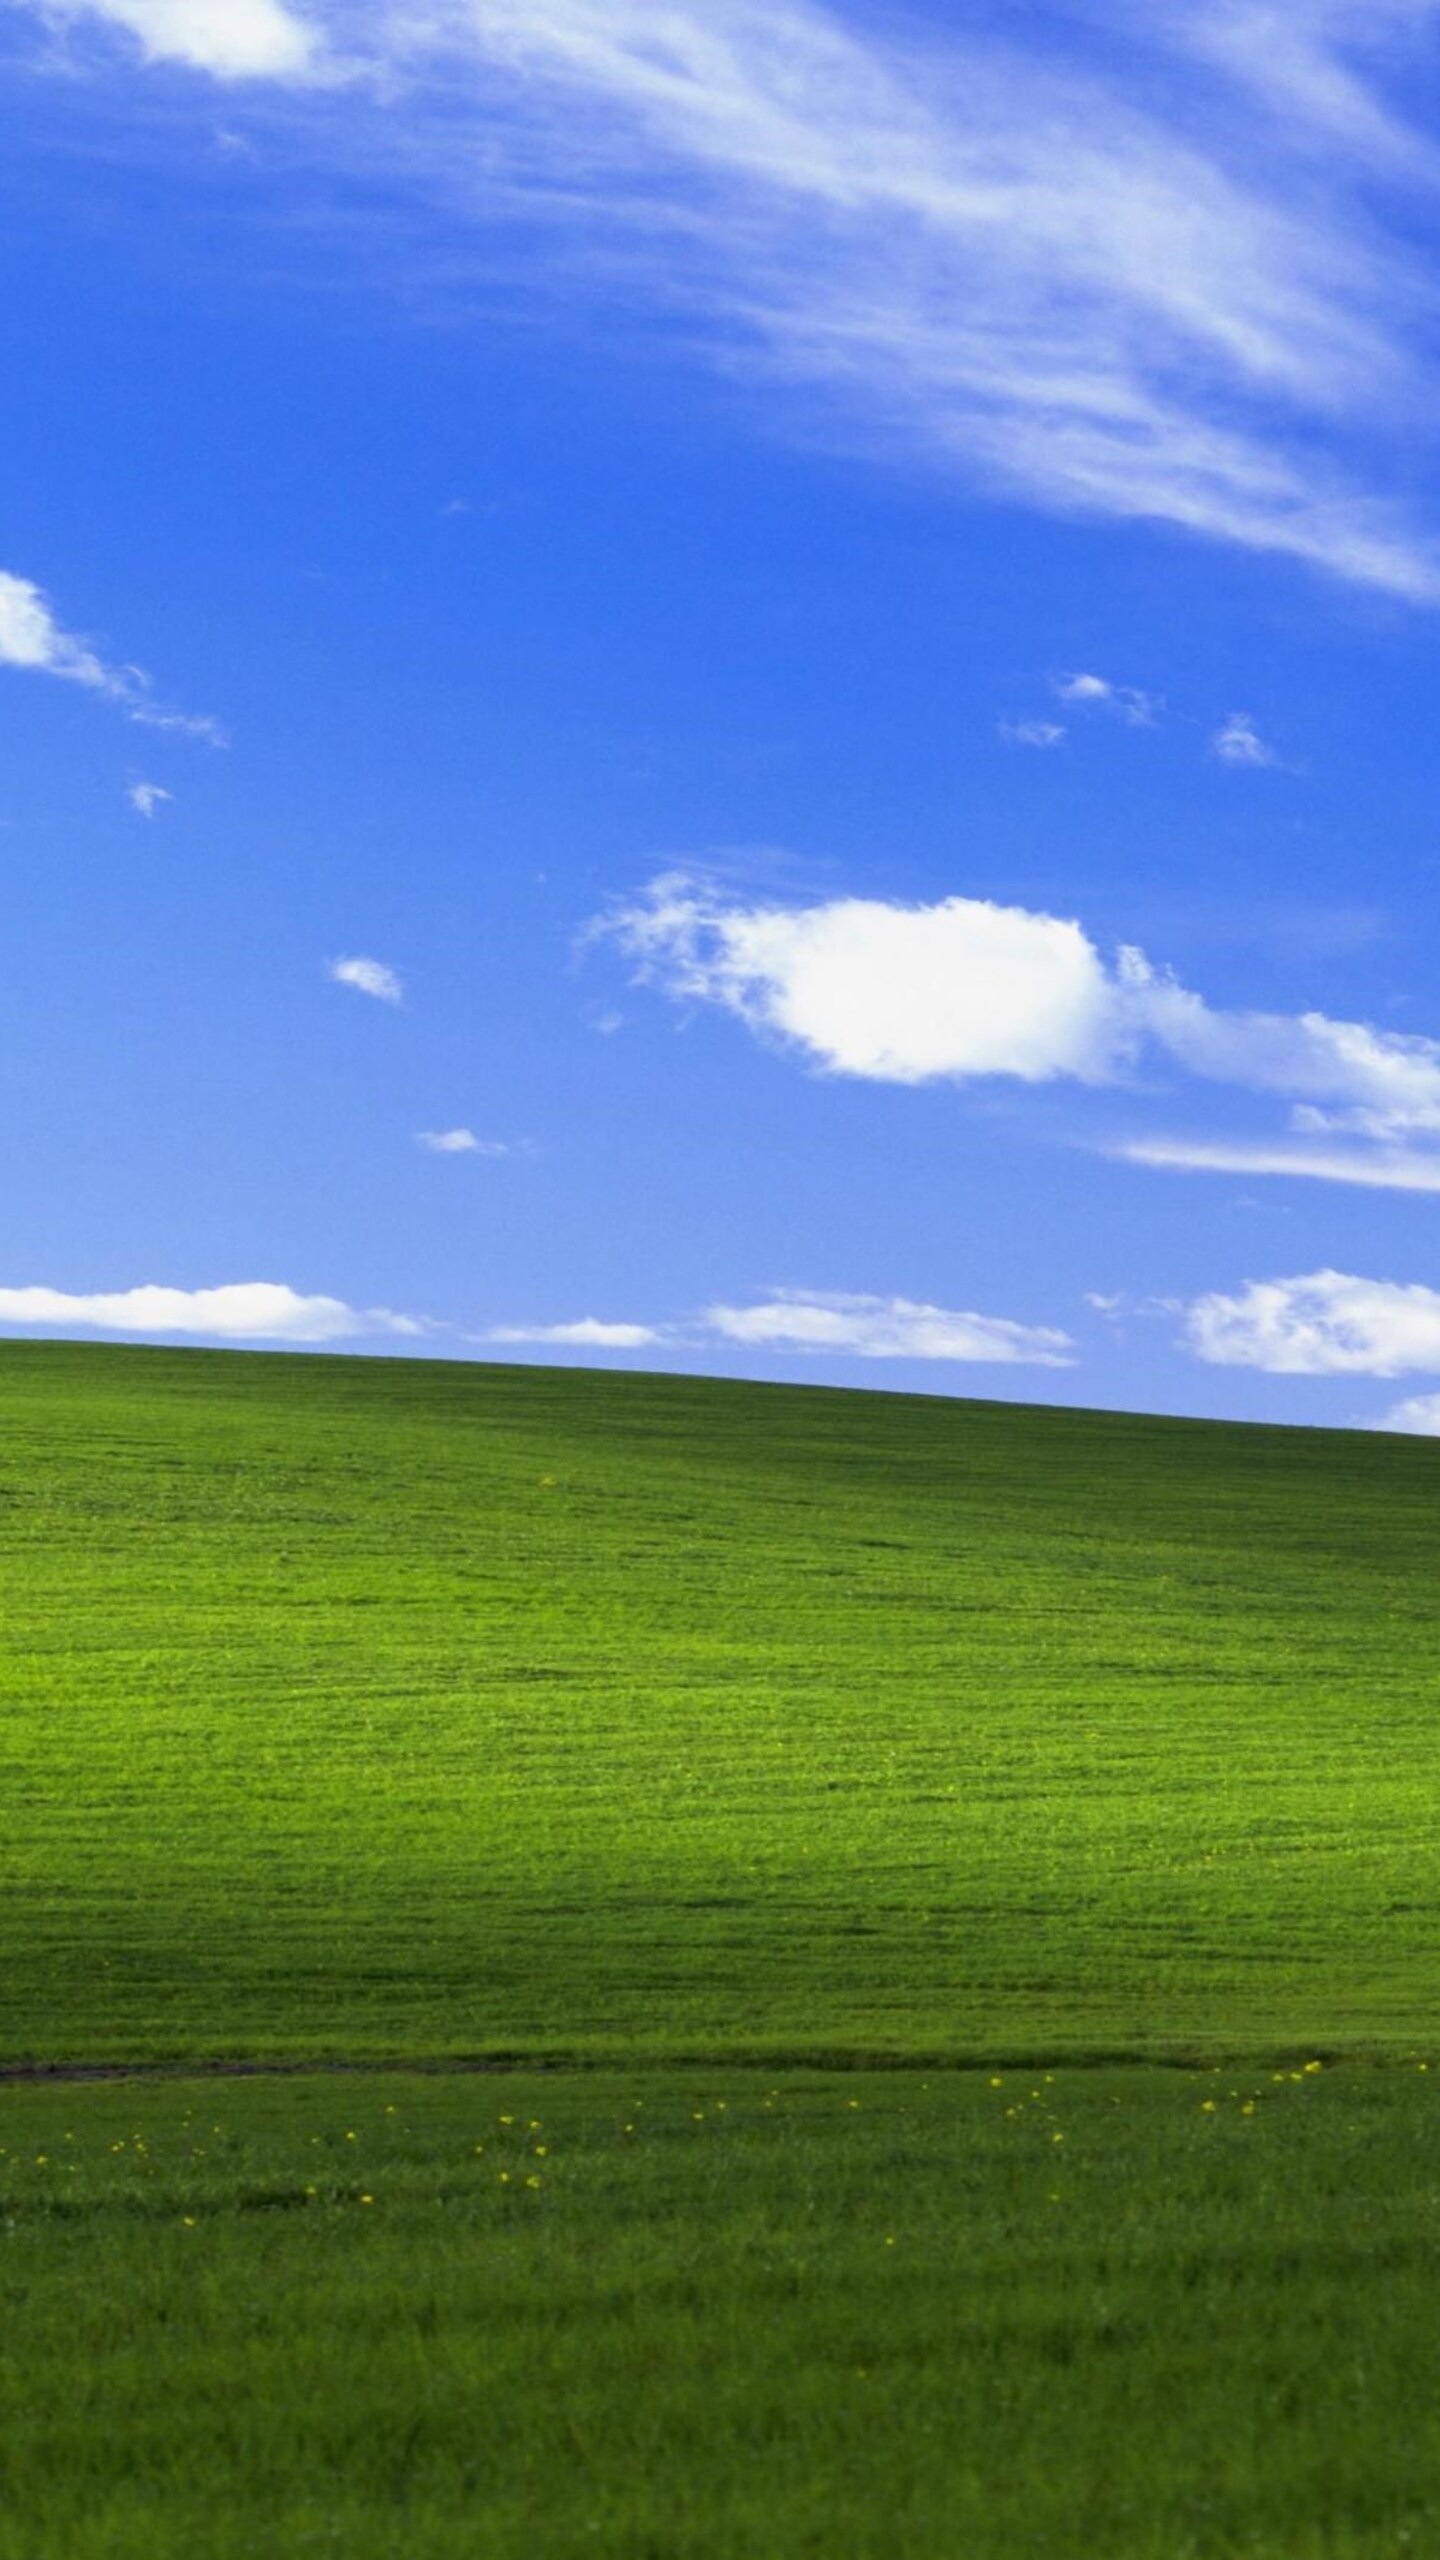 X windows xp bliss k samsung galaxy ss google pixel xl nexus p lg g hd k wallpapers images backgrounds photos and pictures